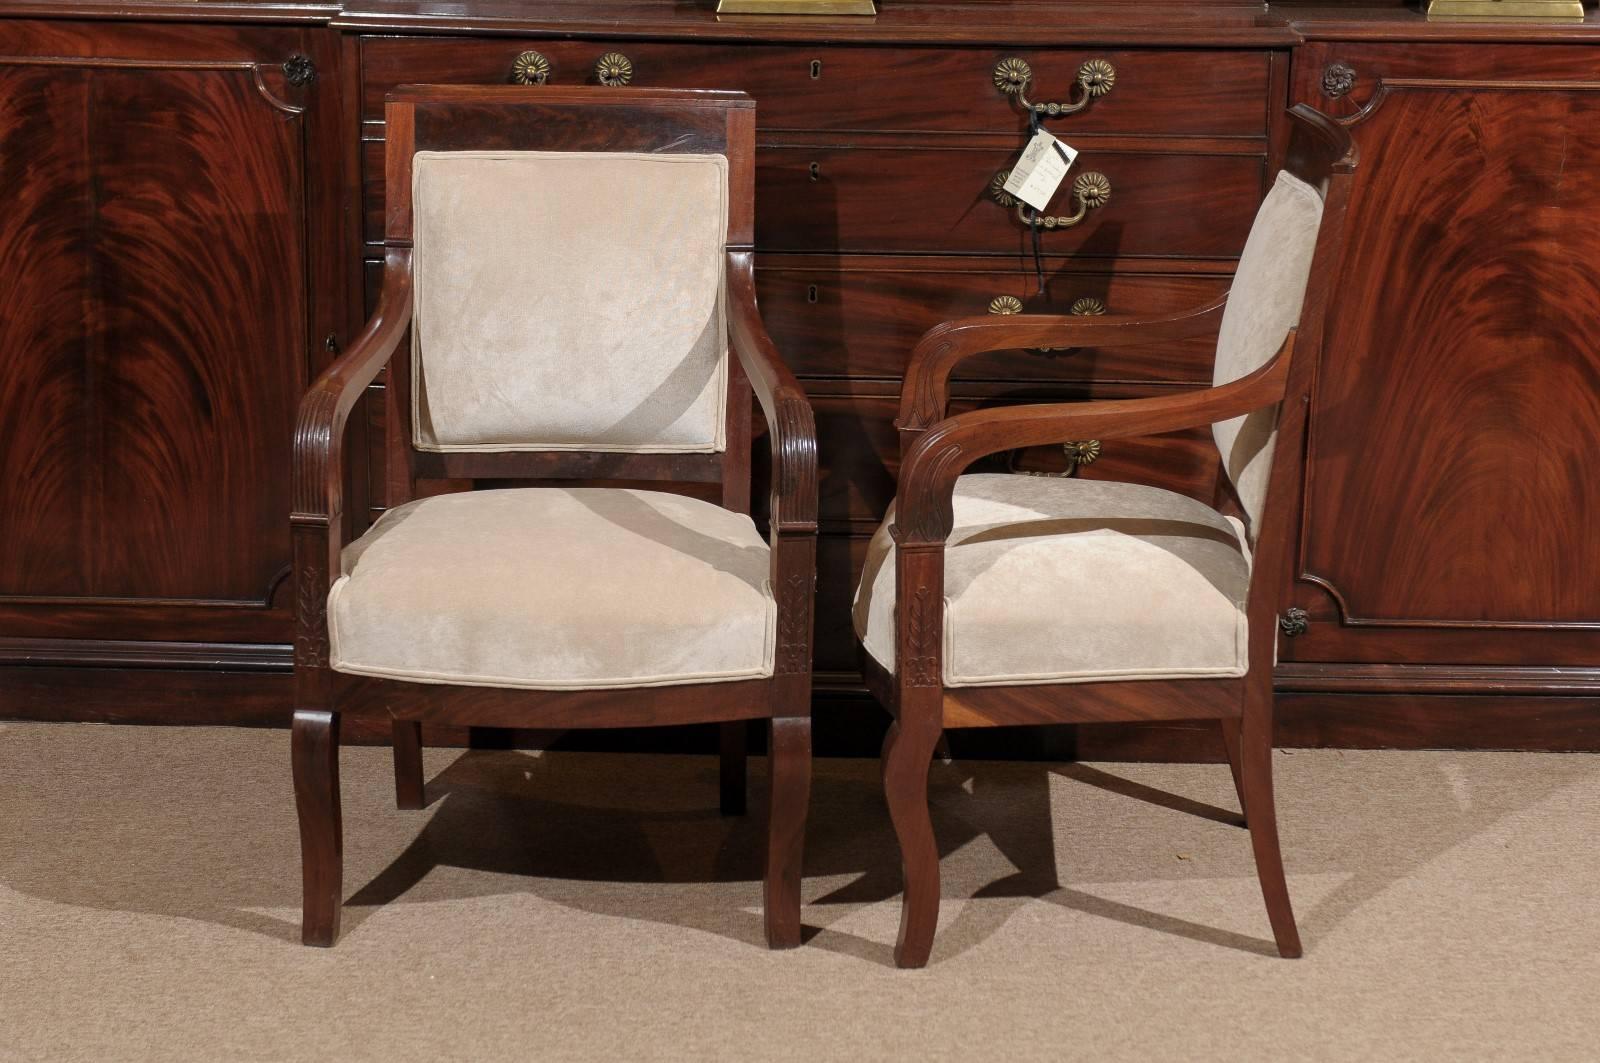 Pair of French Empire Mahogany Fauteuils, 19th Century, circa 1810 For Sale 3